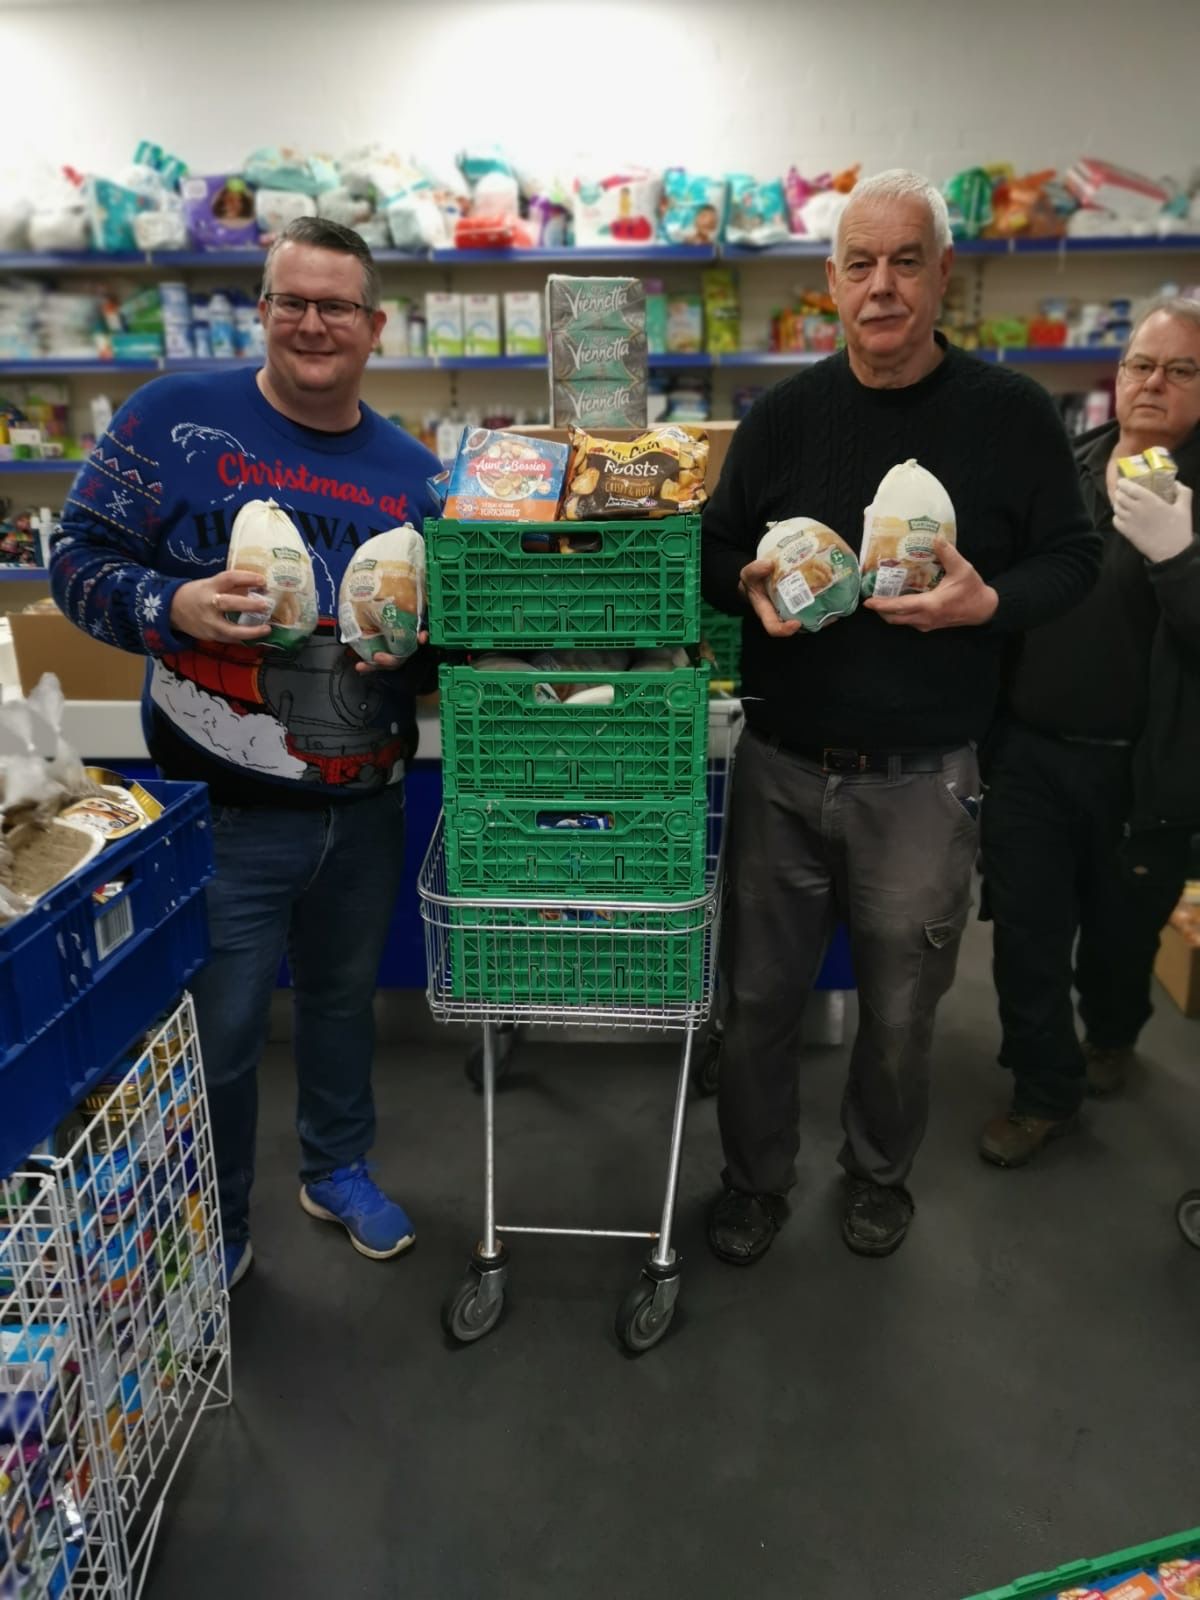 Western MCC support community foodbank with some frozen meal deals